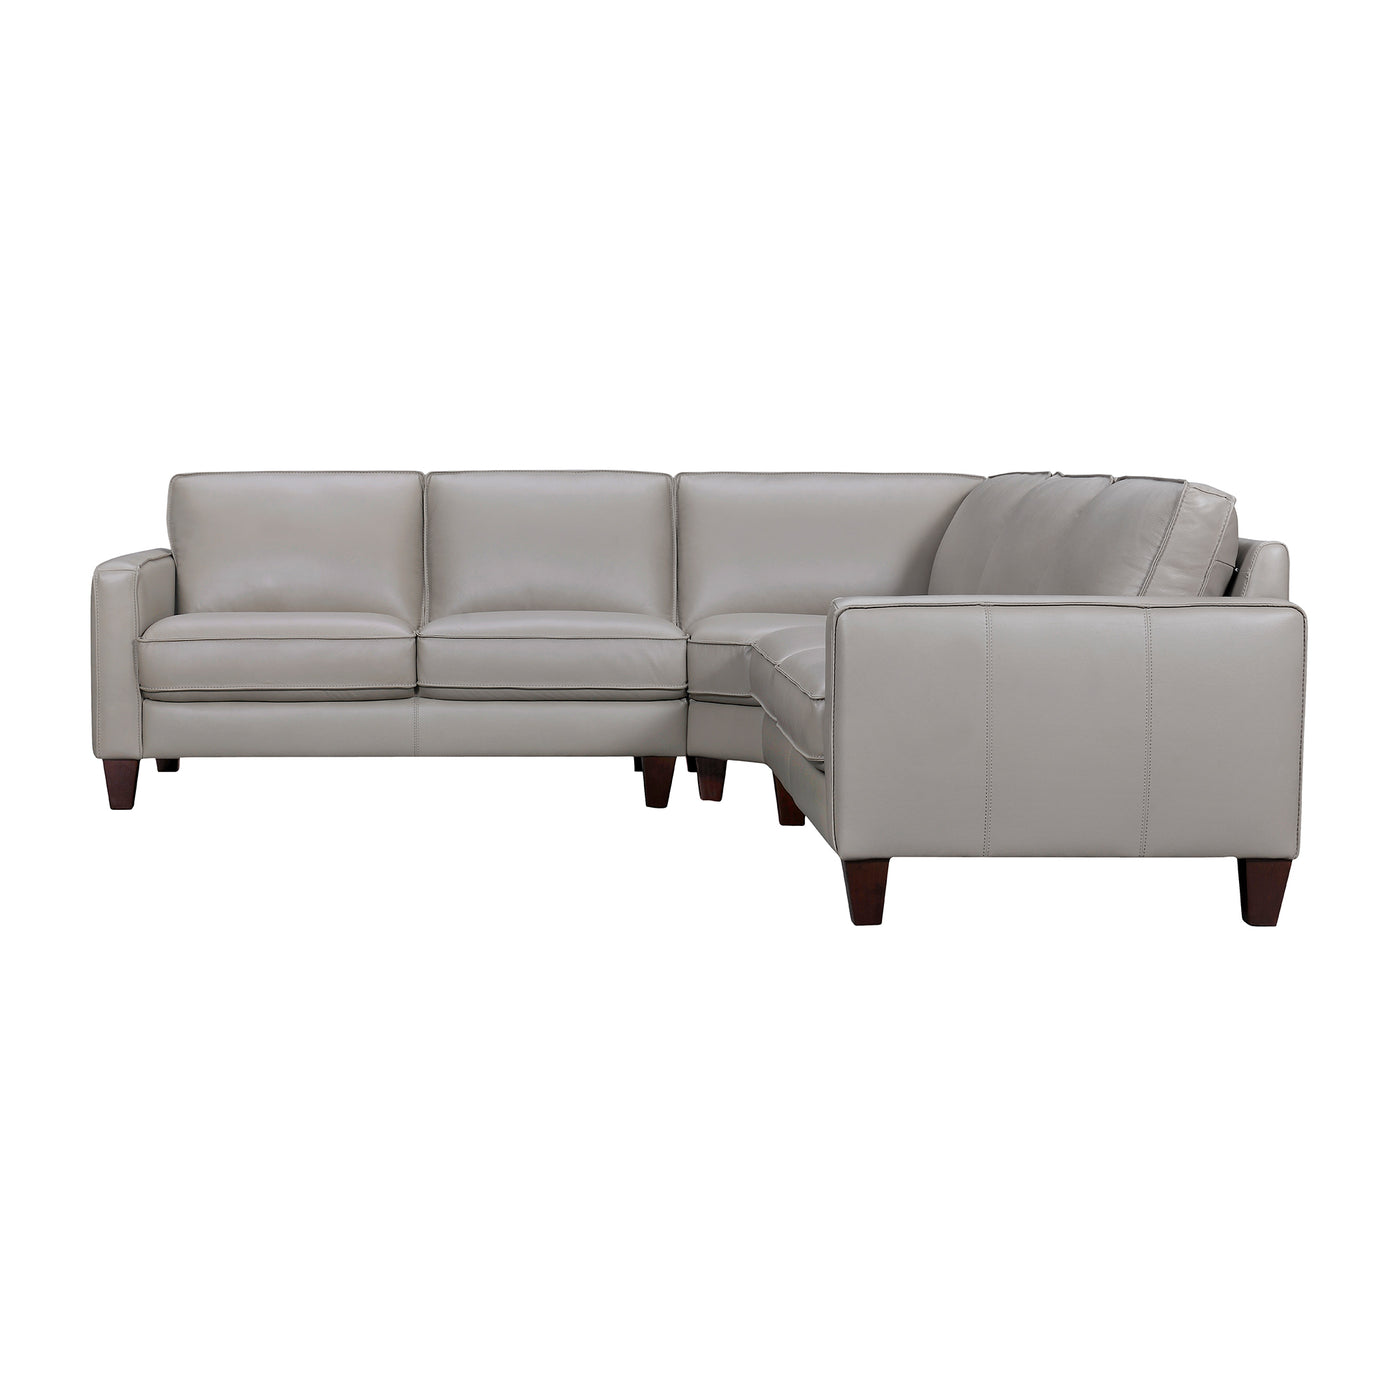 Summit 3 Piece Leather Sectional Sofa